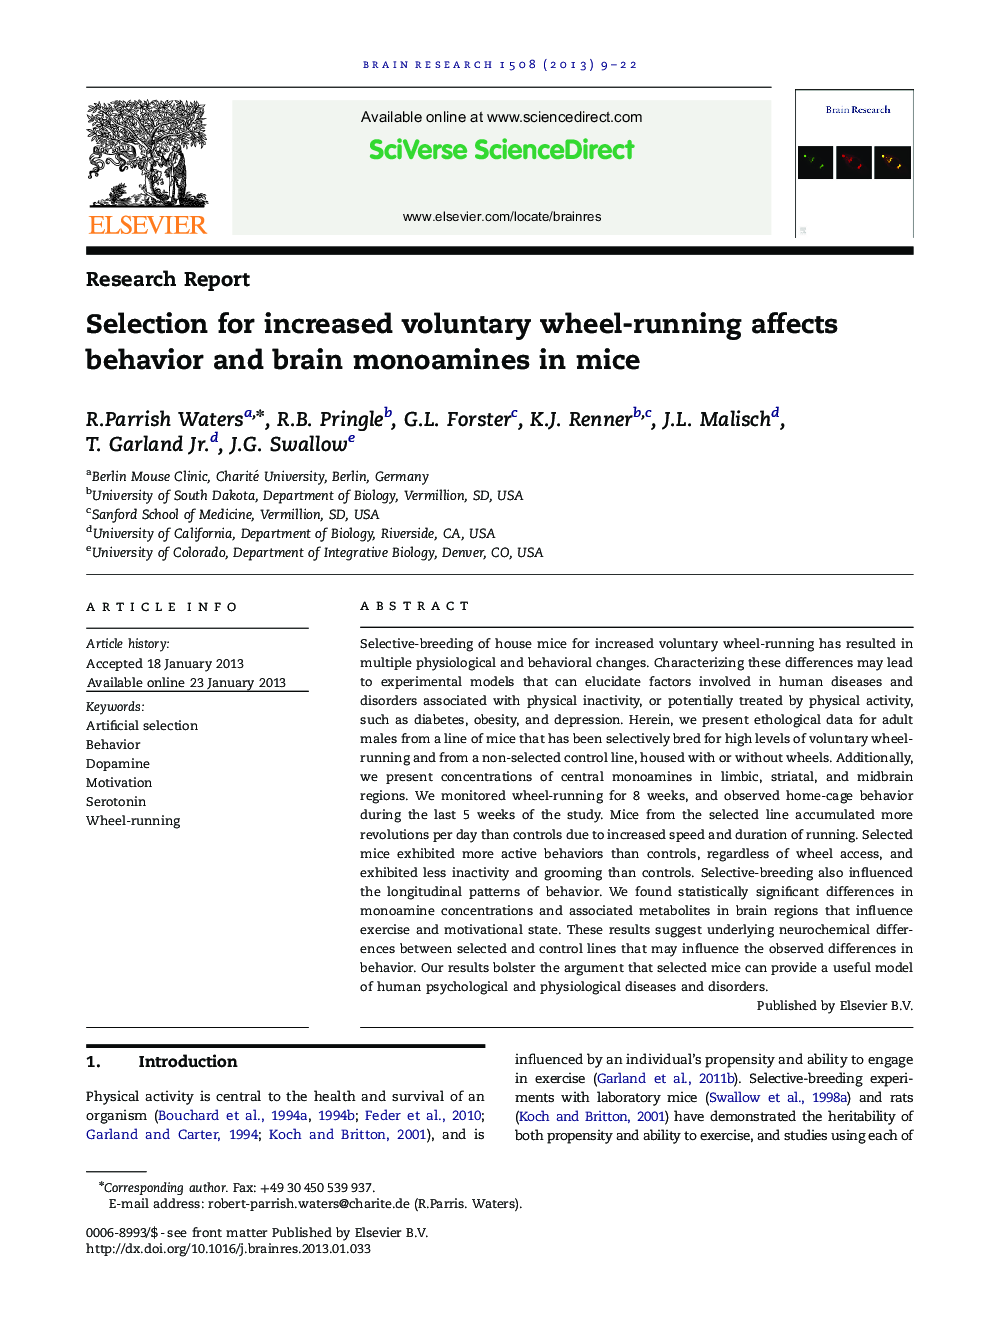 Selection for increased voluntary wheel-running affects behavior and brain monoamines in mice